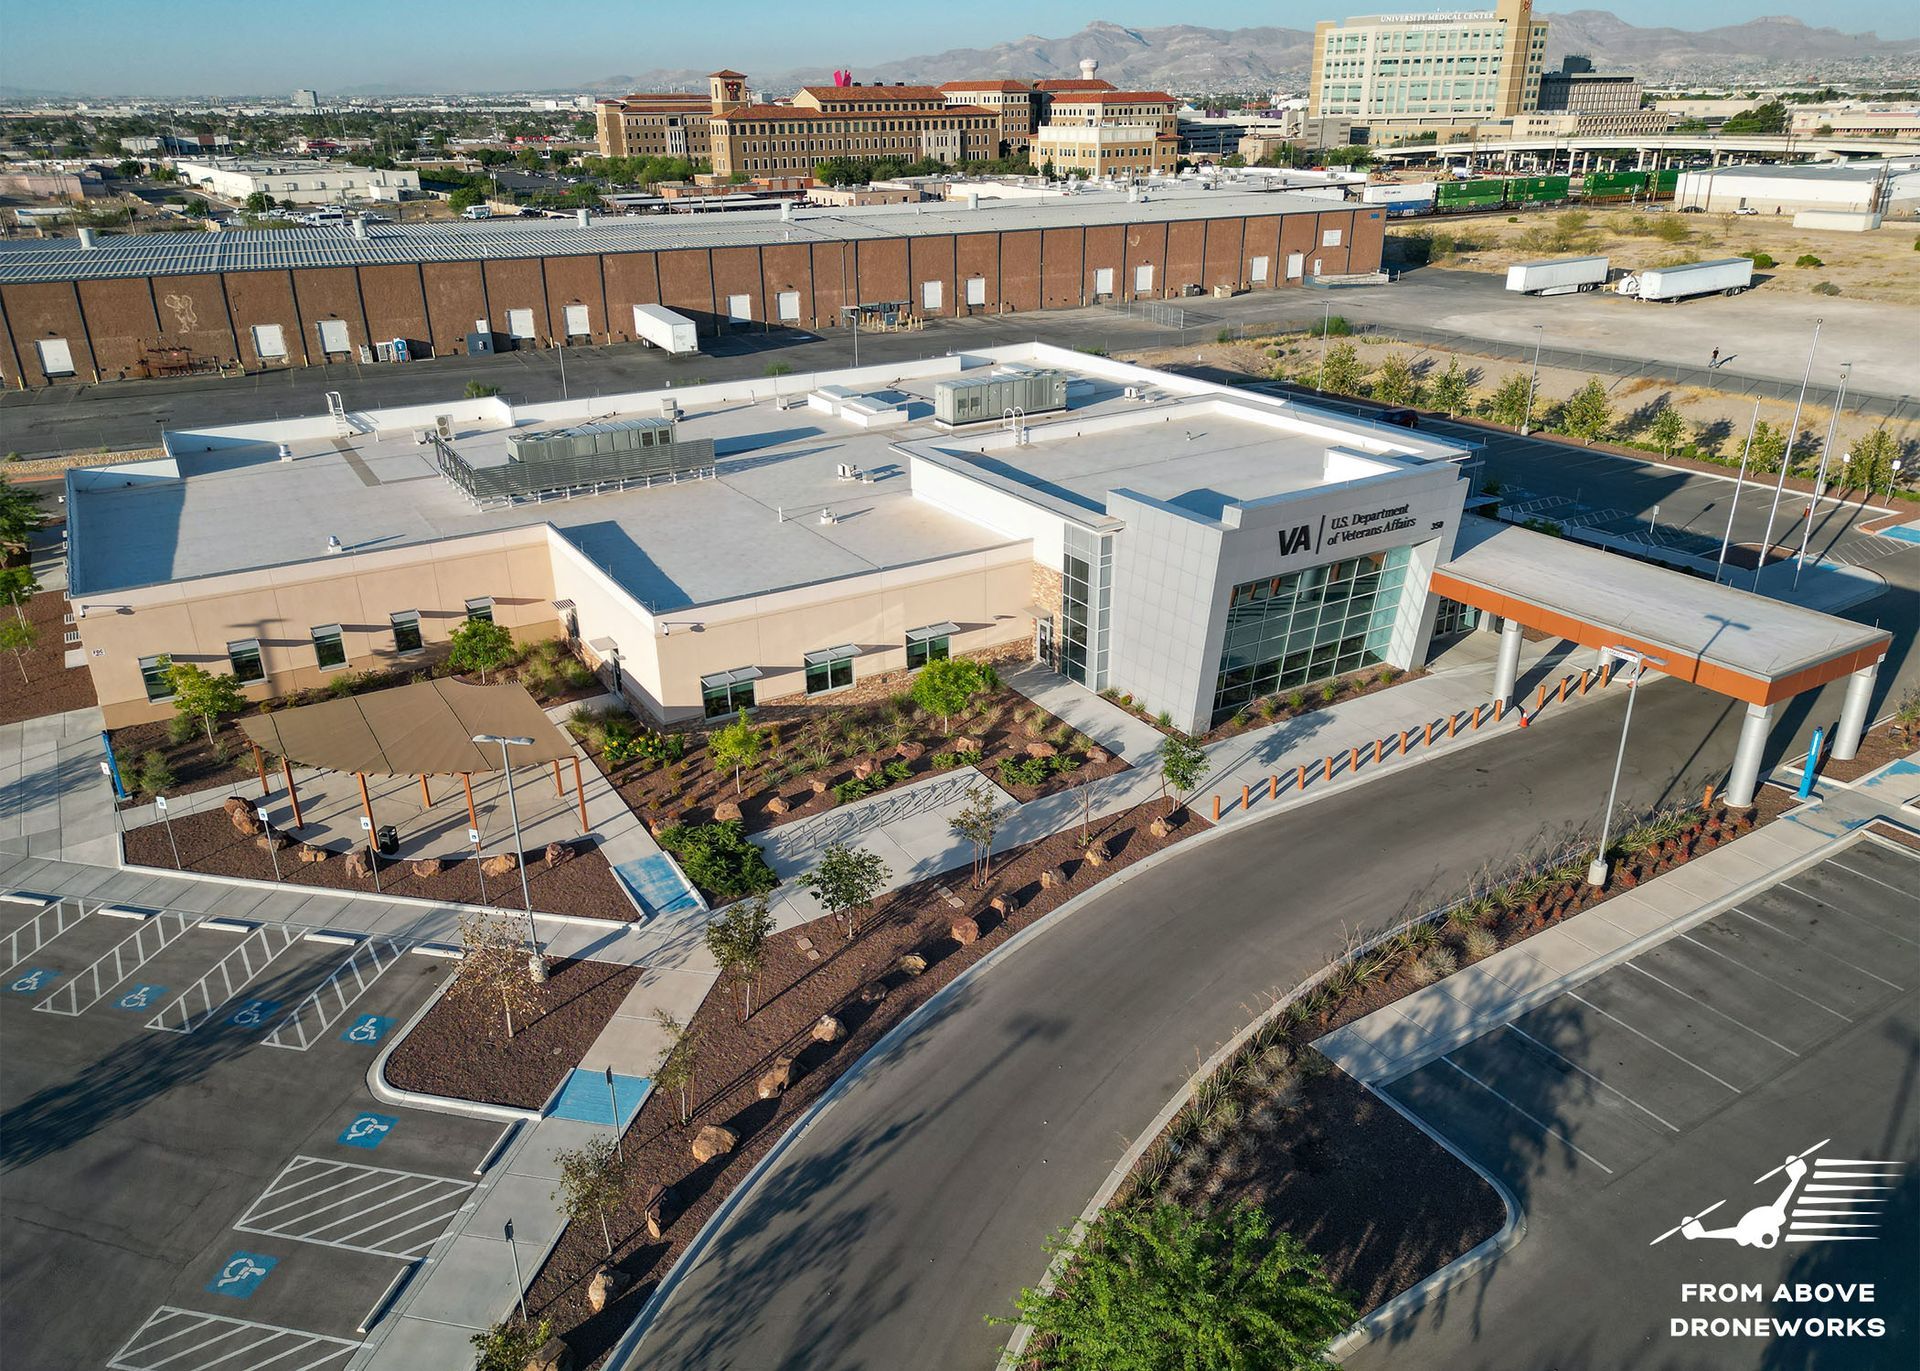 New VA Campus near the MCA Foundation of El Paso: An image displaying the newly constructed VA (Veterans Affairs) Campus adjacent to the Medical Center of the Americas (MCA) Foundation in El Paso. The photo may showcase the modern infrastructure, buildings, parking areas, and landscaping surrounding the VA facility, highlighting its proximity and connection to the MCA Foundation.